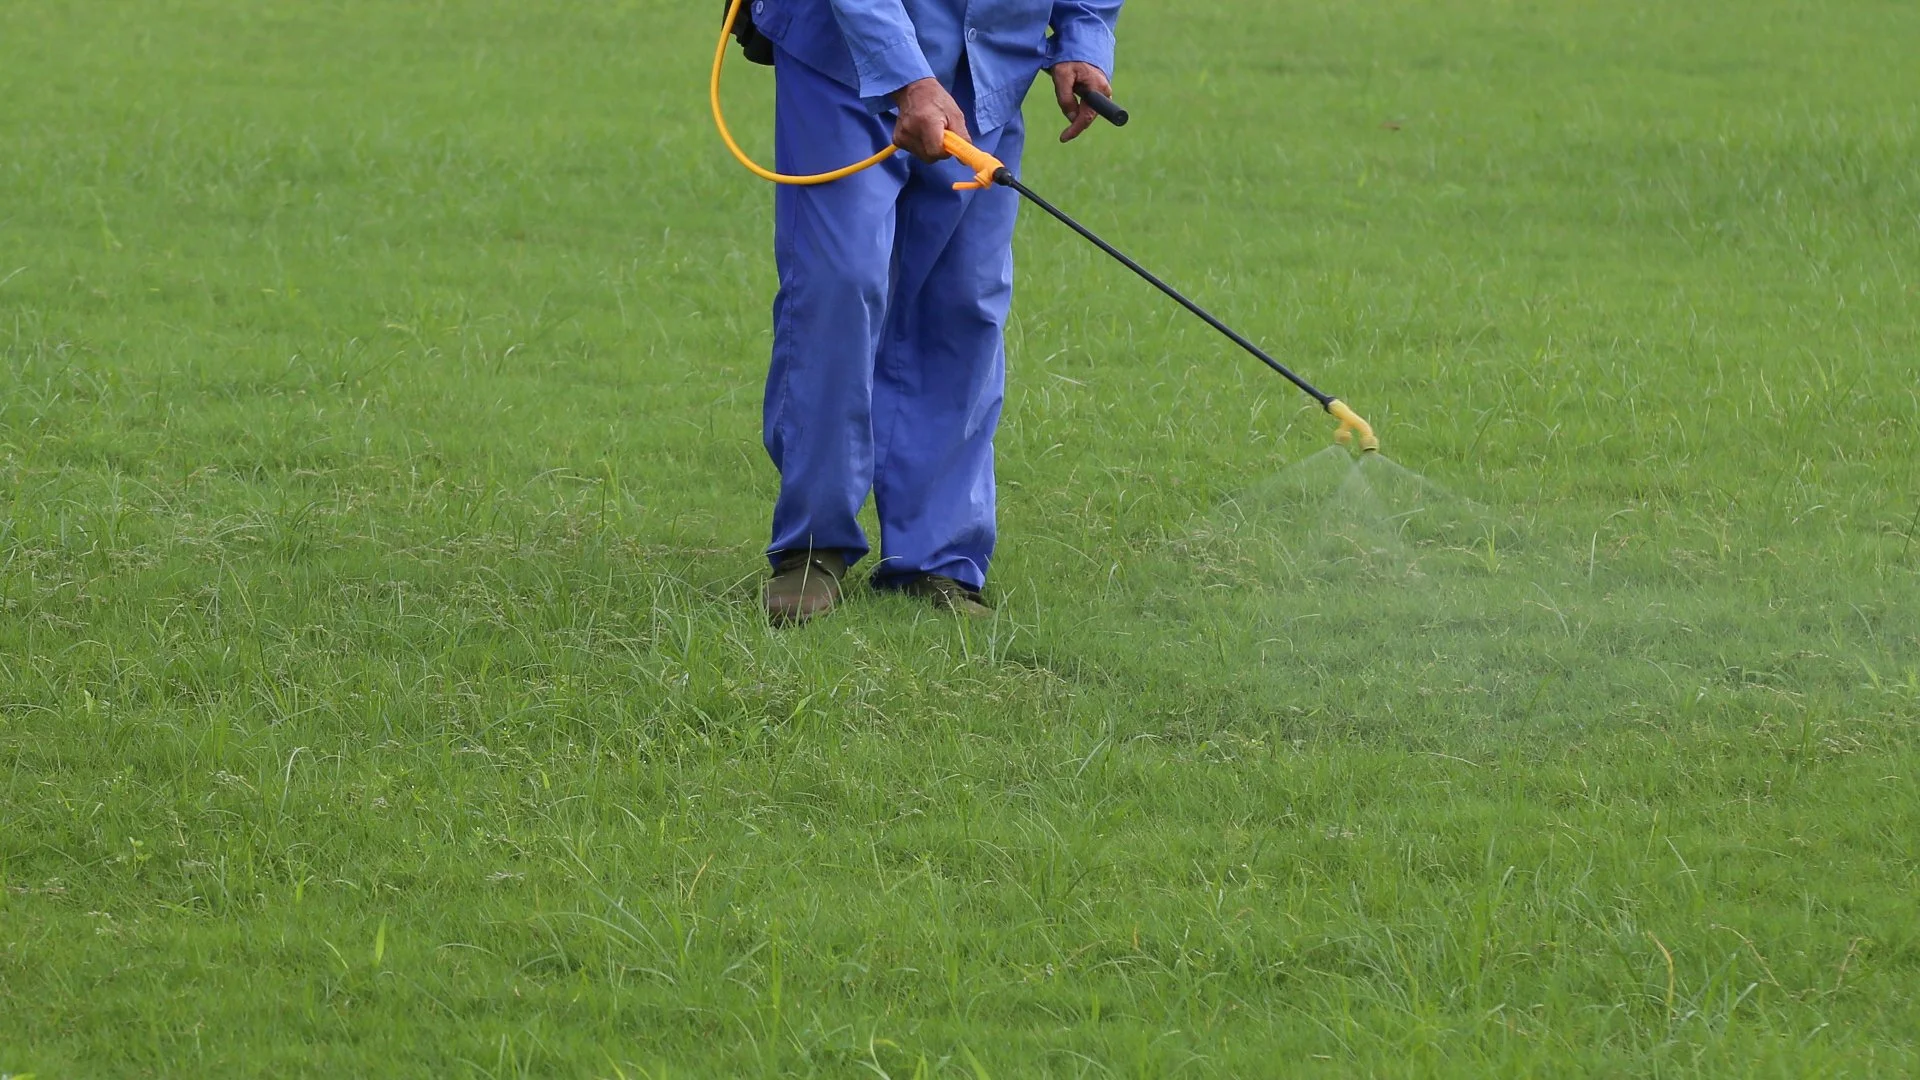 The Rundown on the Nutrients in Your Lawn Fertilizer & When They’re Needed